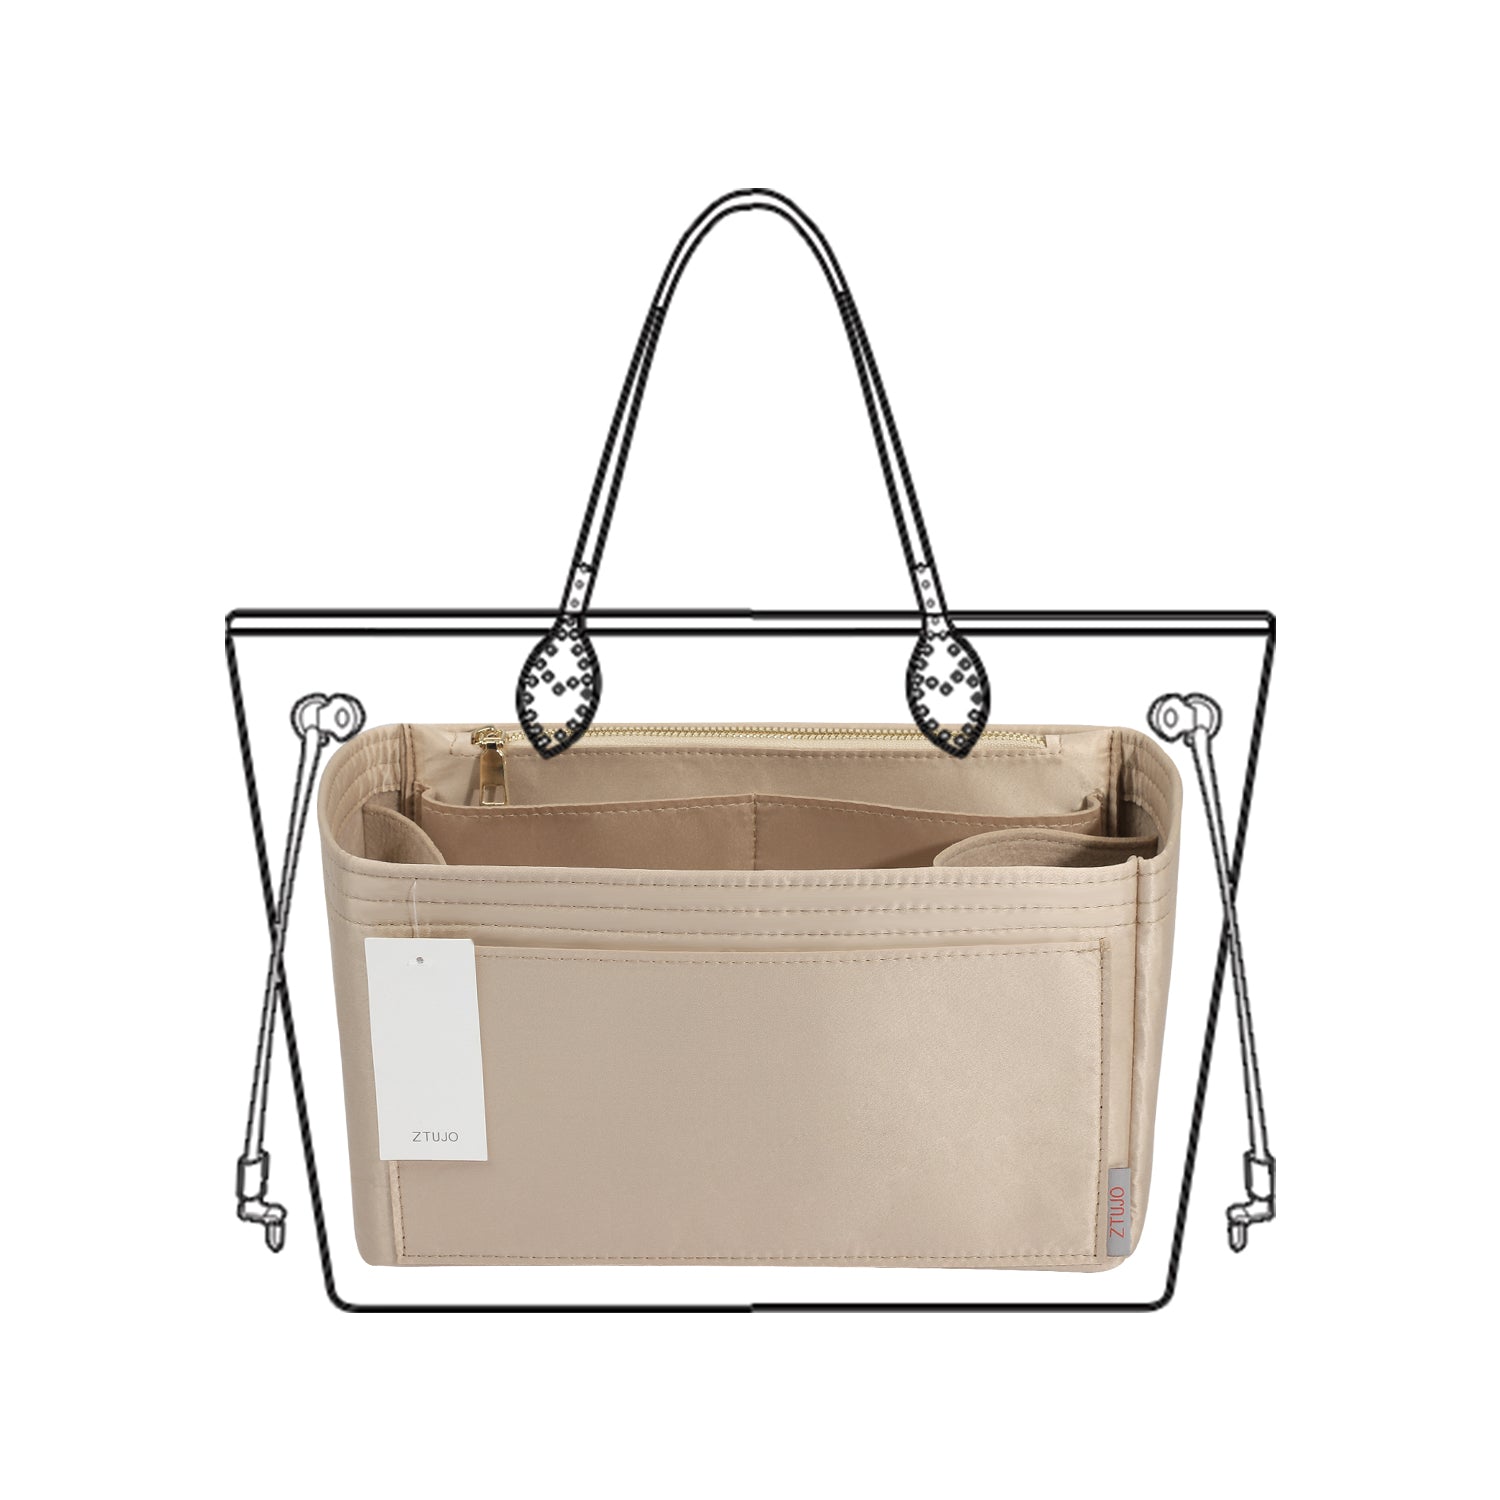 Elevate Your Handbag Game with Our Silky Touch Purse Organizer Insert - Ideal for Speedy, Neverfull, Tote, ONTHEGO, Artsy, and More